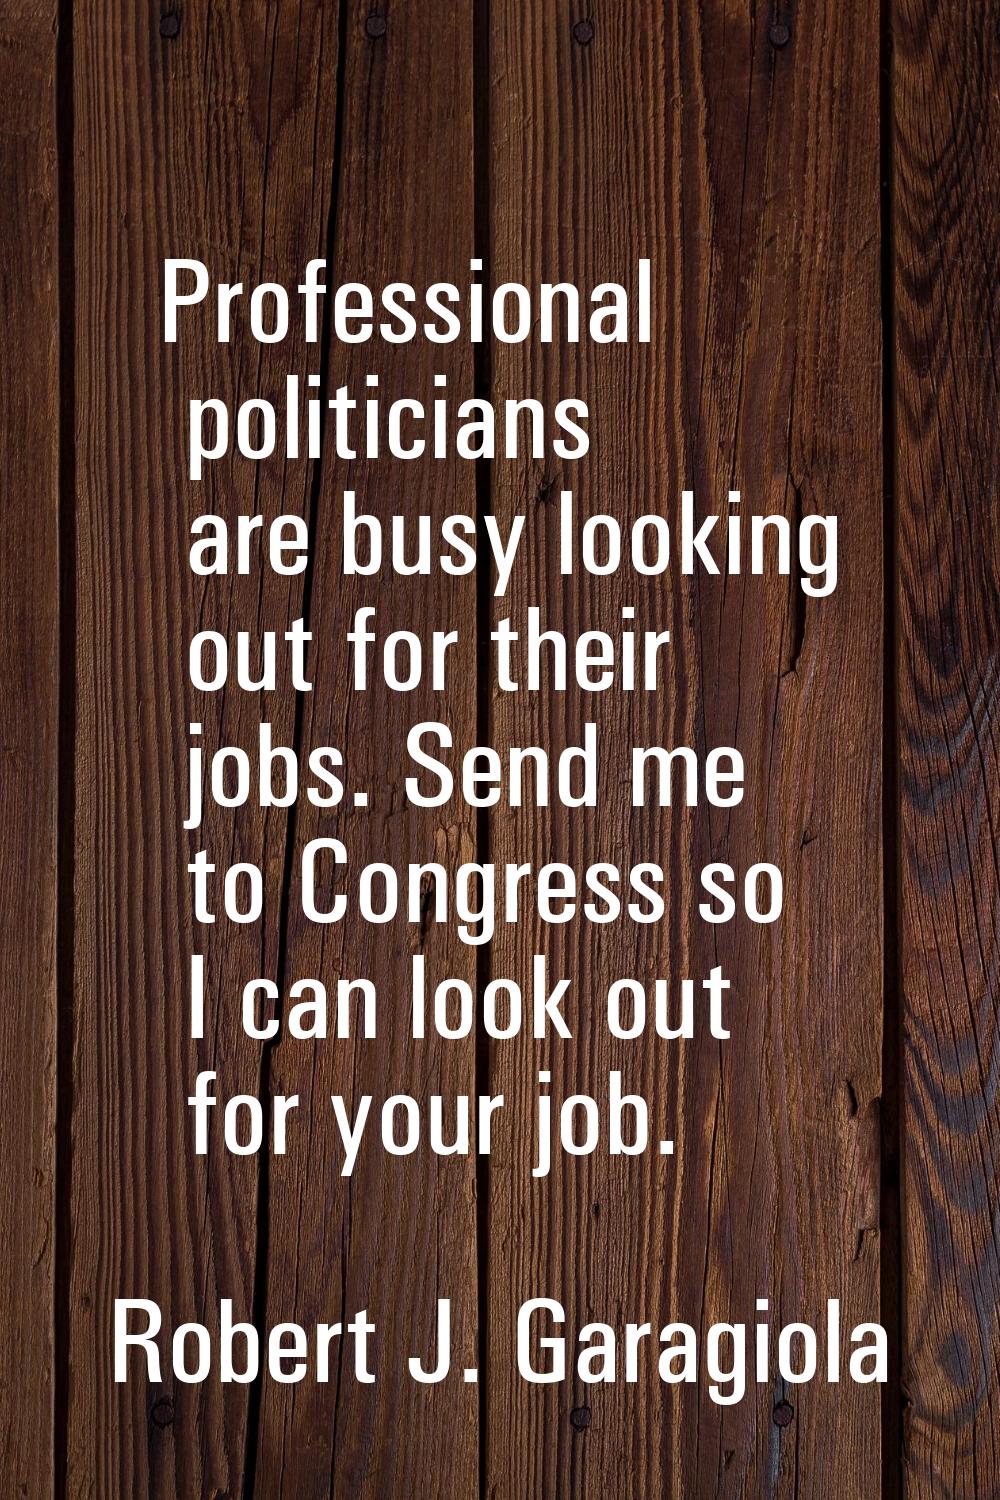 Professional politicians are busy looking out for their jobs. Send me to Congress so I can look out